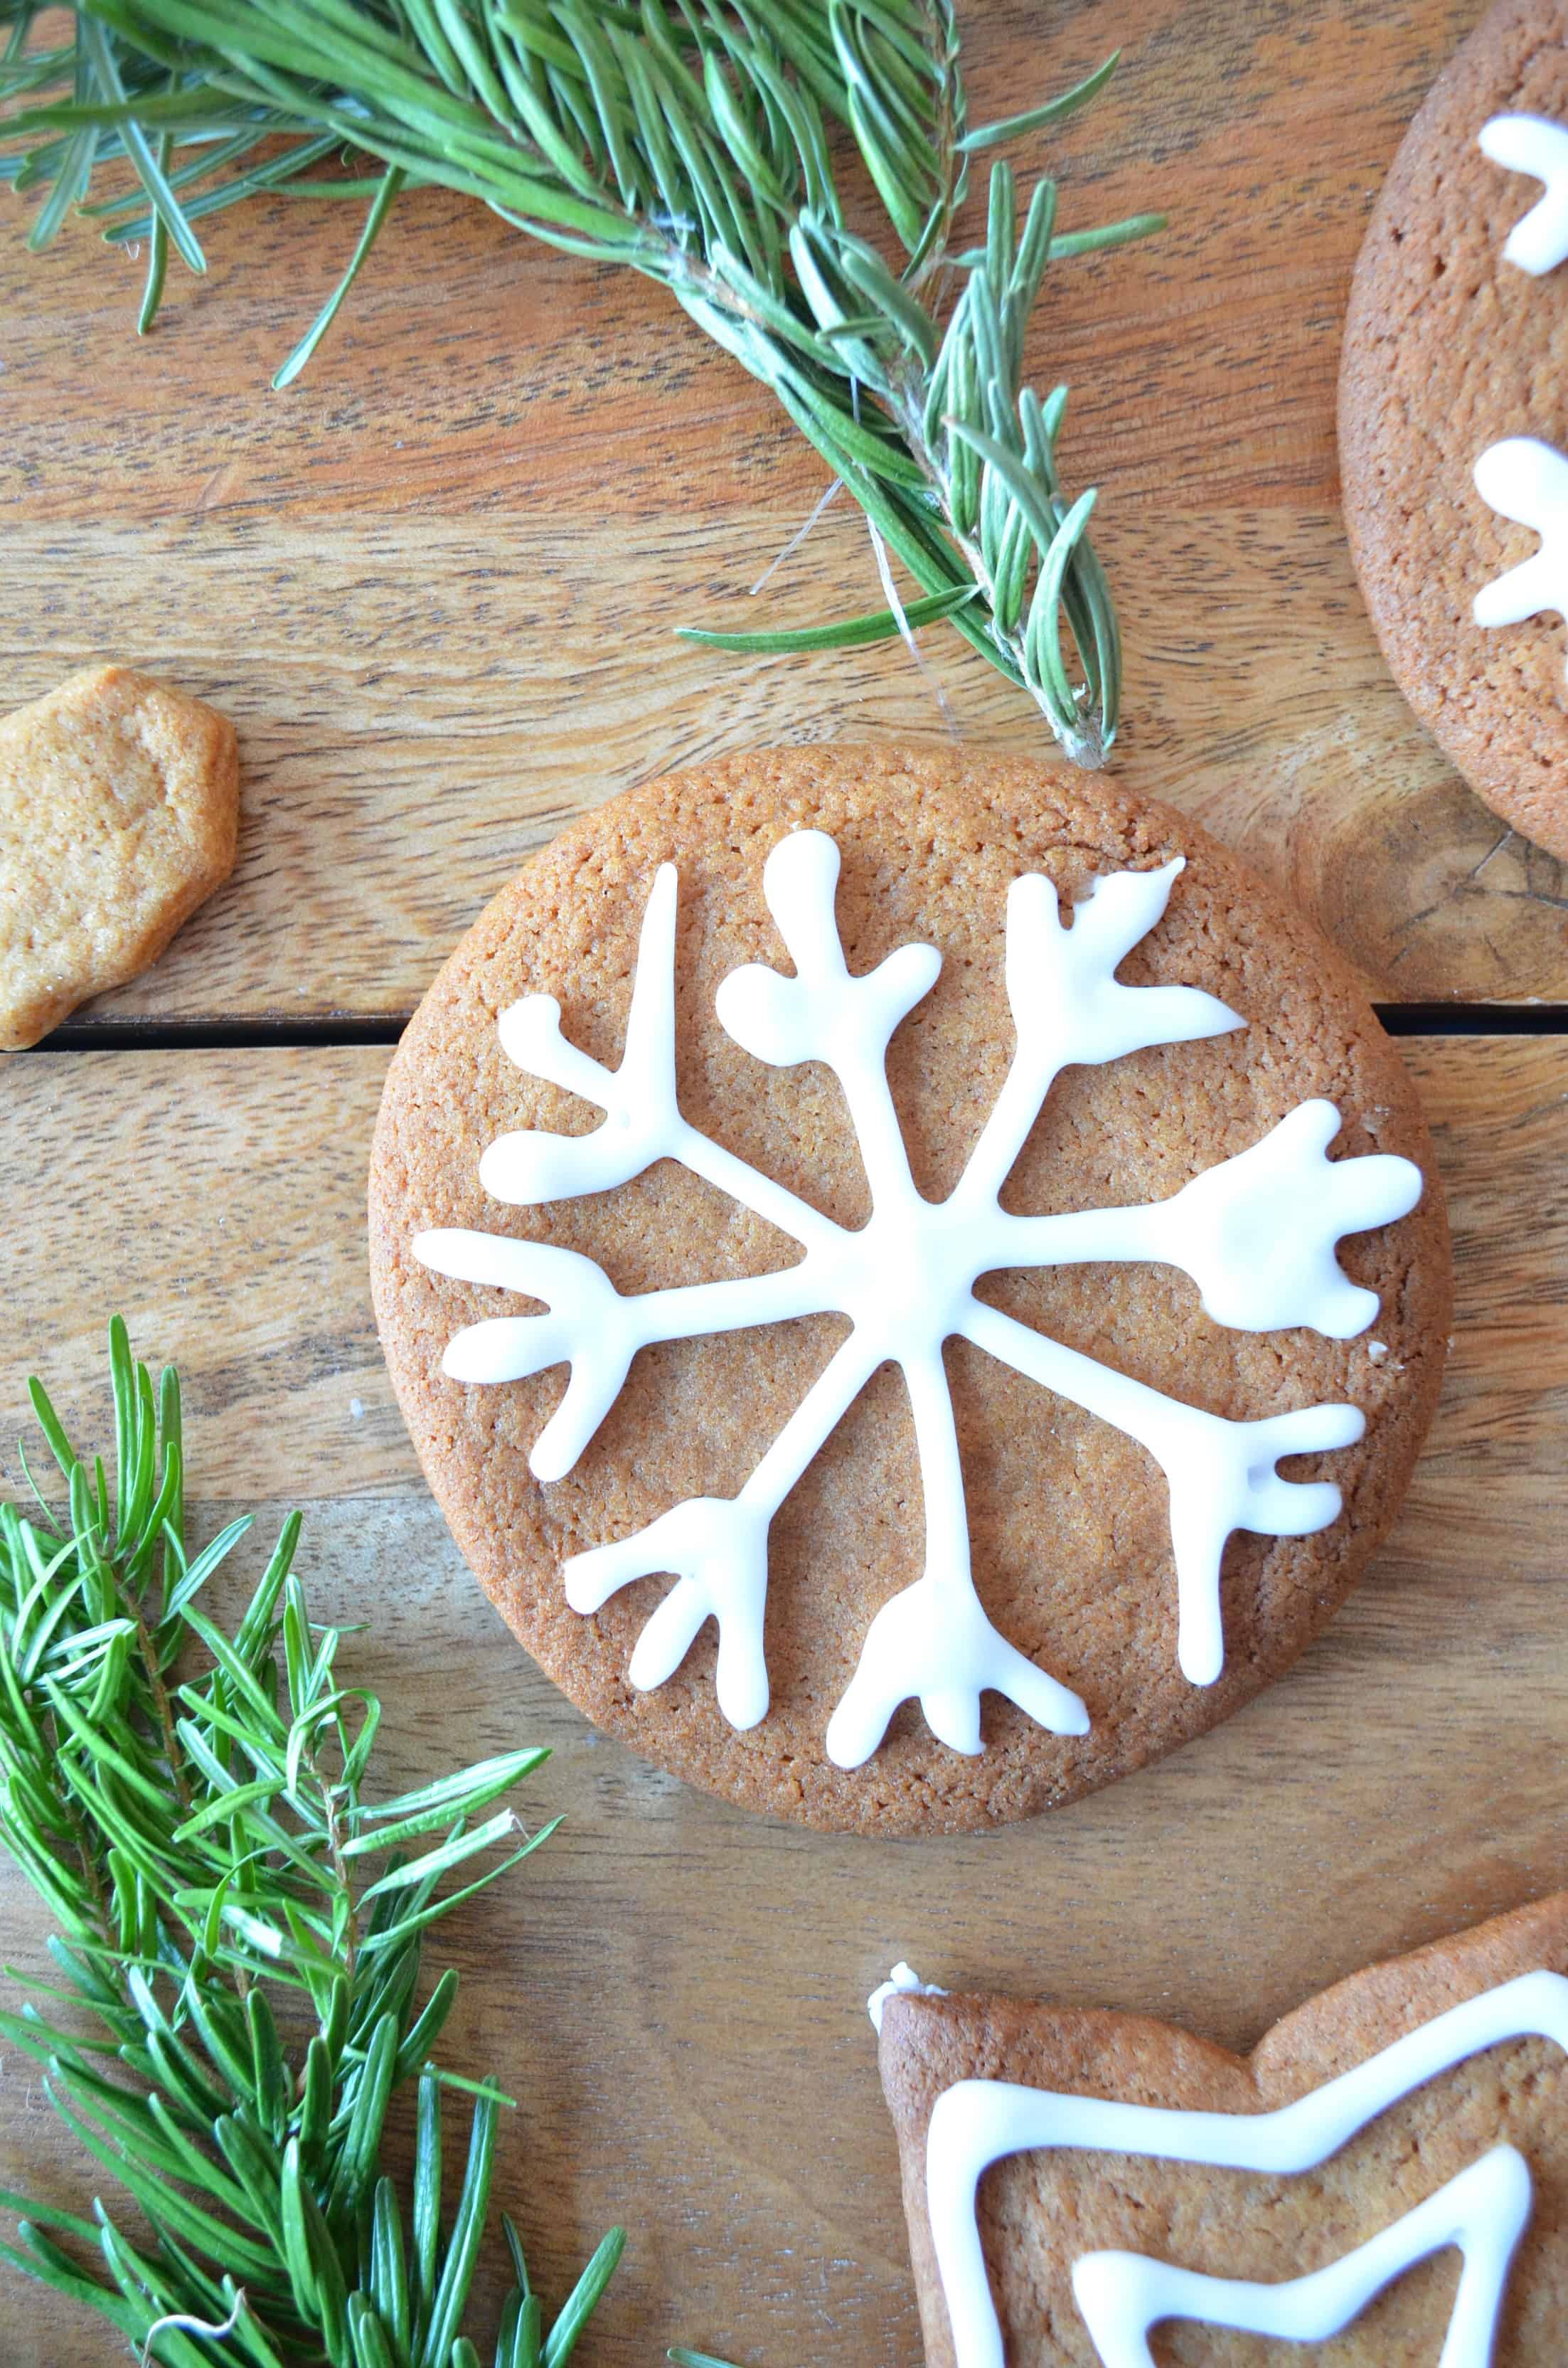 iced gingerbread biscuits